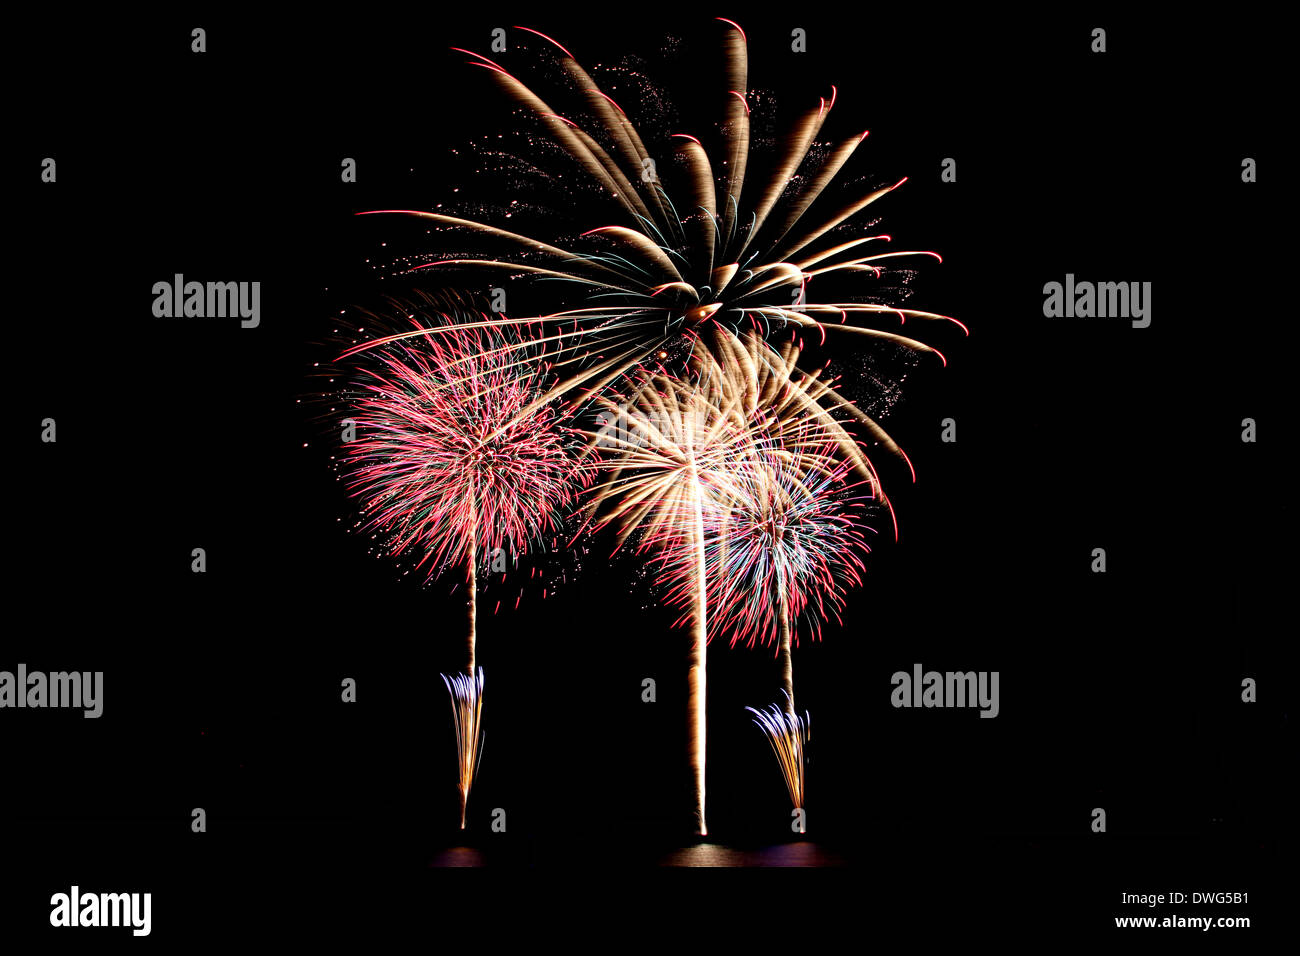 Variety of colors Mix Fireworks or firecracker in the darkness. Stock Photo